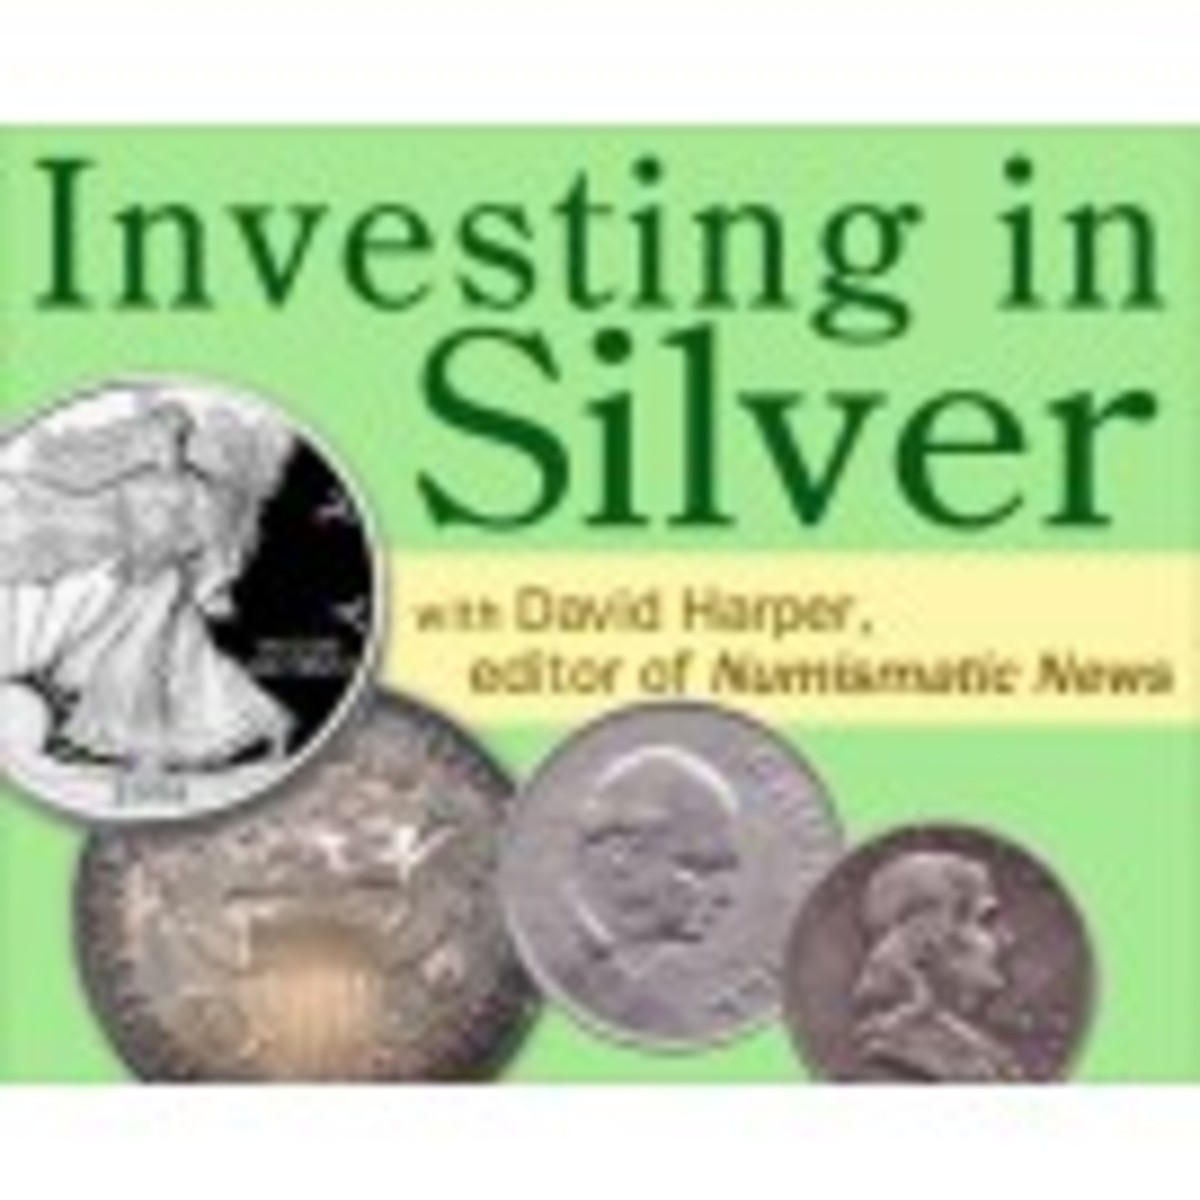 Investing in Silver Online Seminar Recording